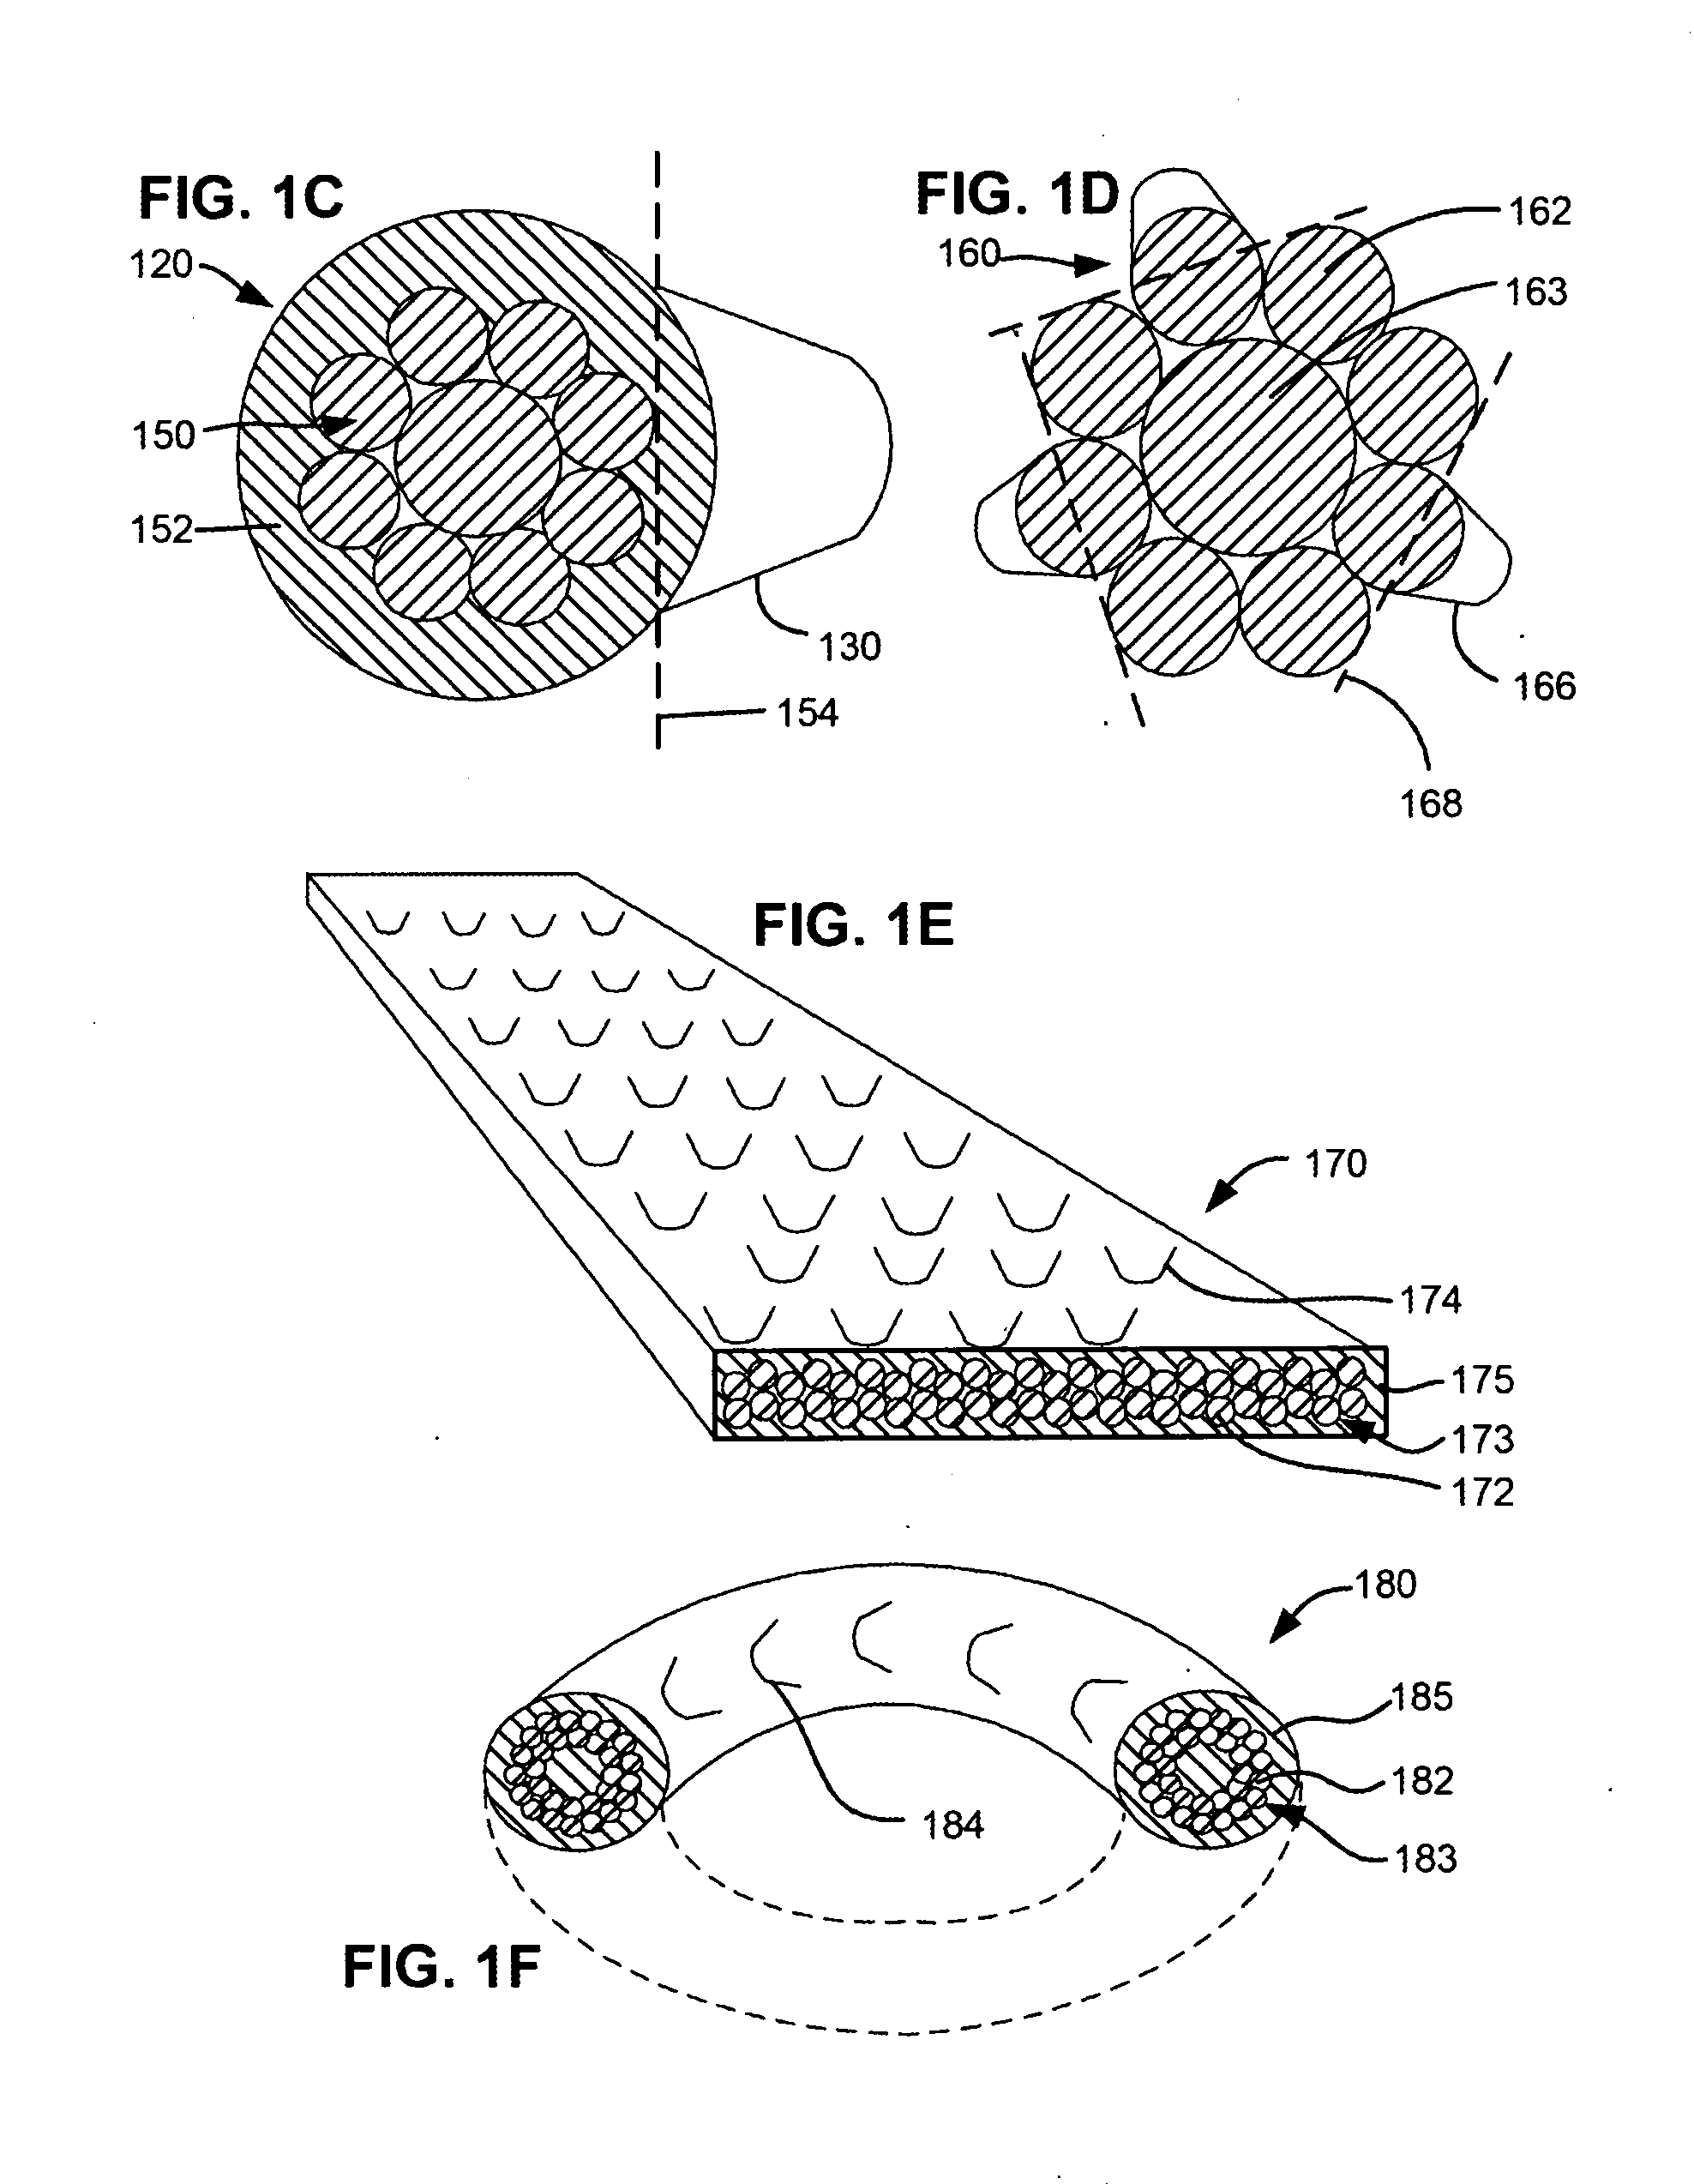 Braided self-retaining sutures and methods